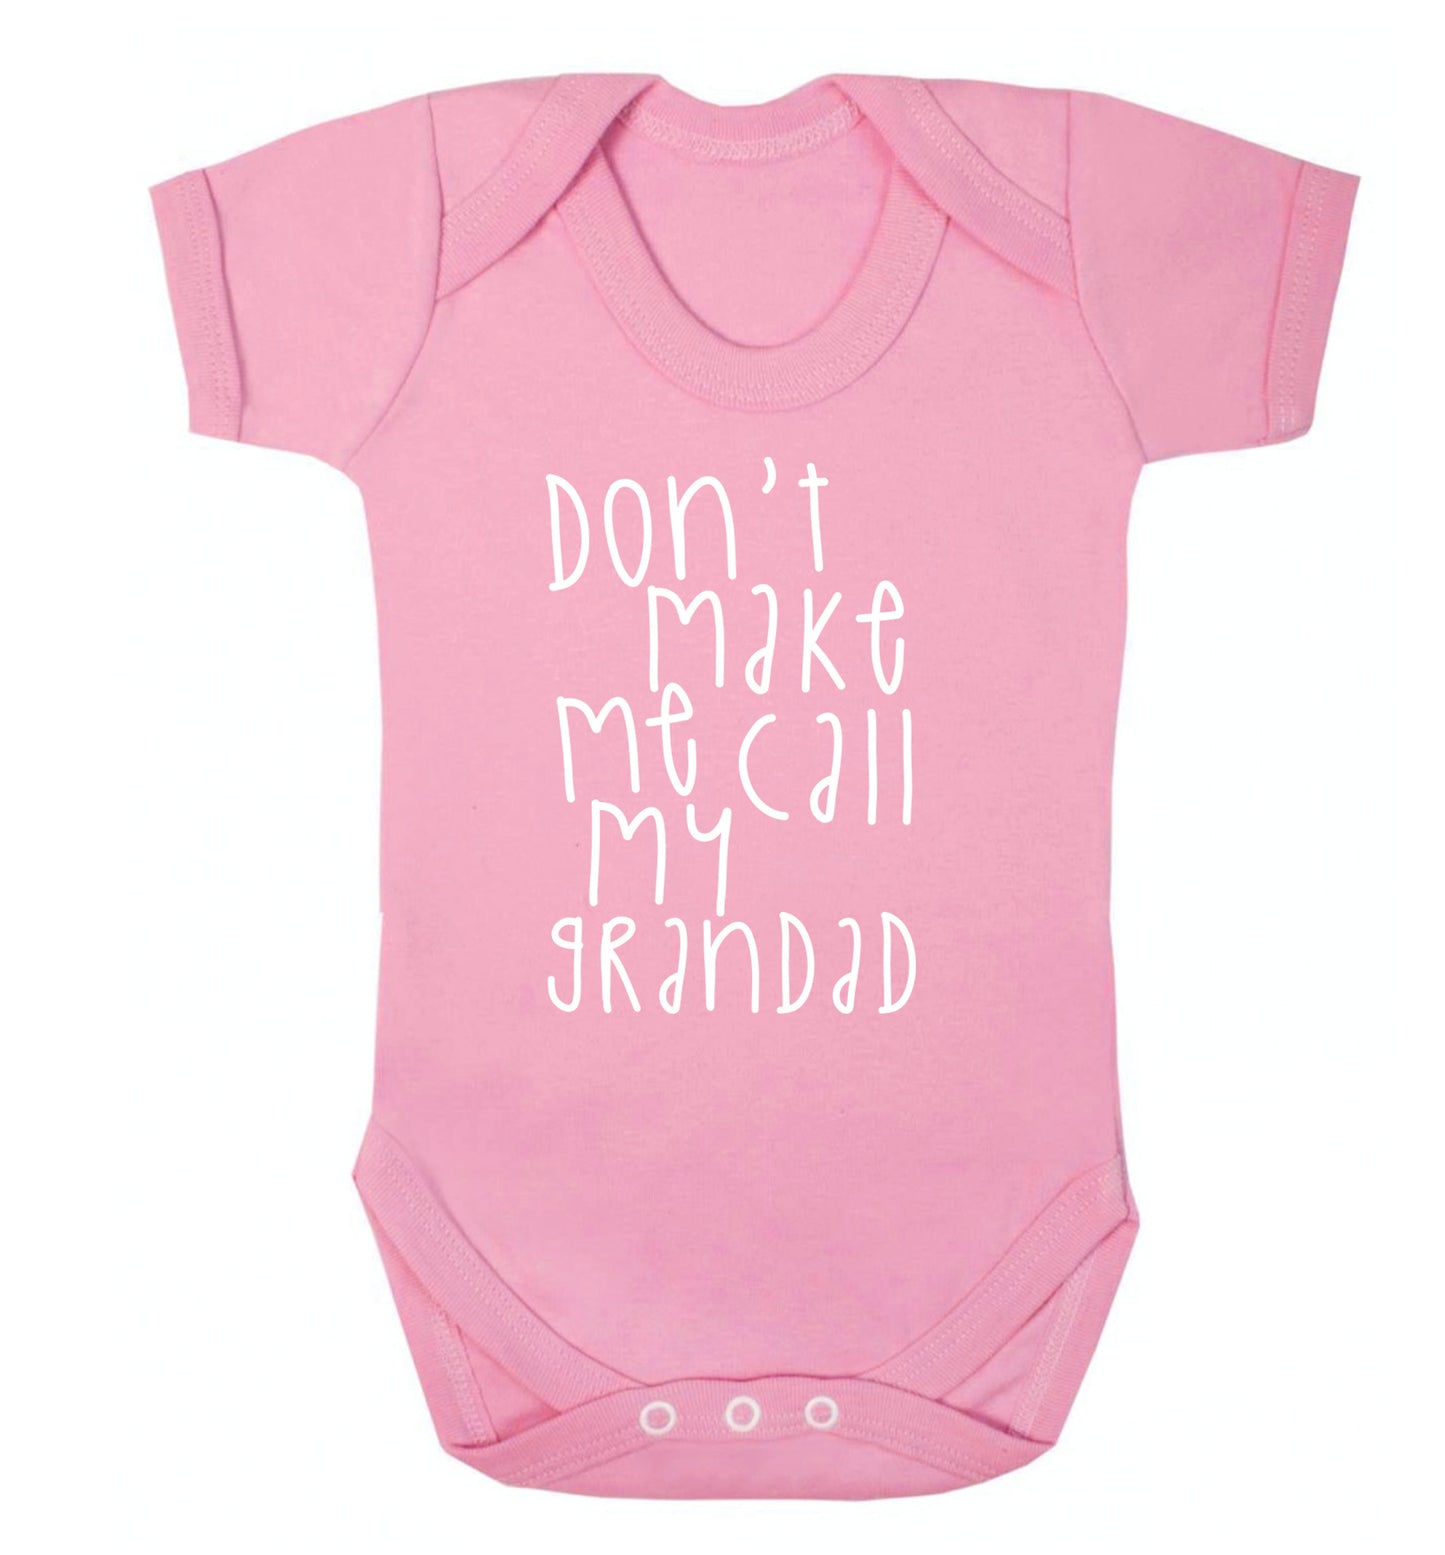 Don't make me call my grandad Baby Vest pale pink 18-24 months